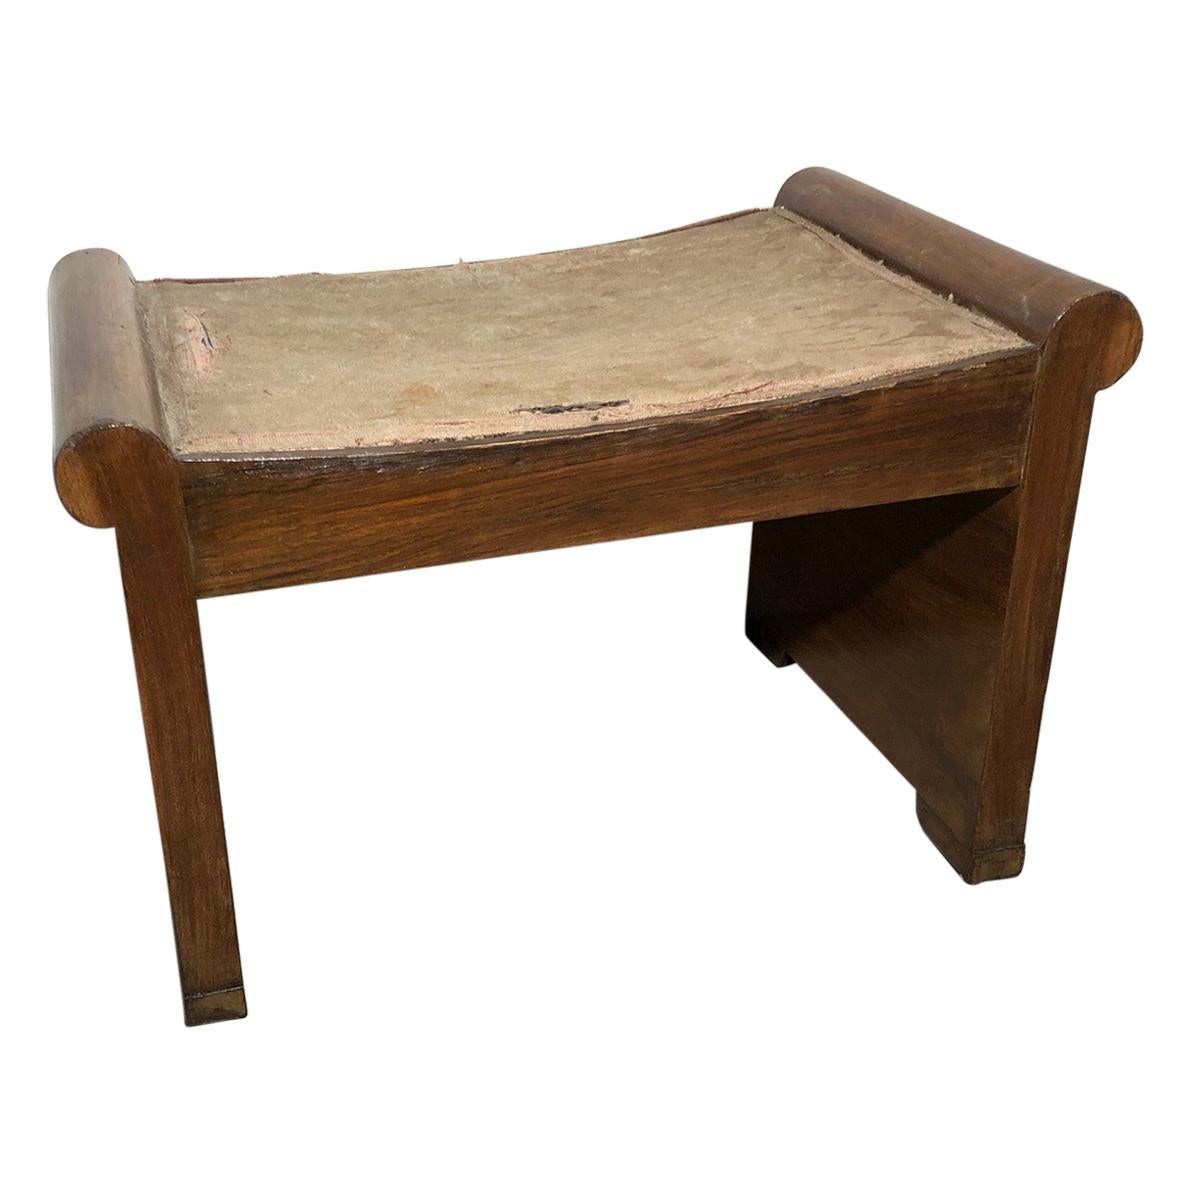 Original Italian Decò Bench from 1920 with Upholstery to Be Redone Natural Color